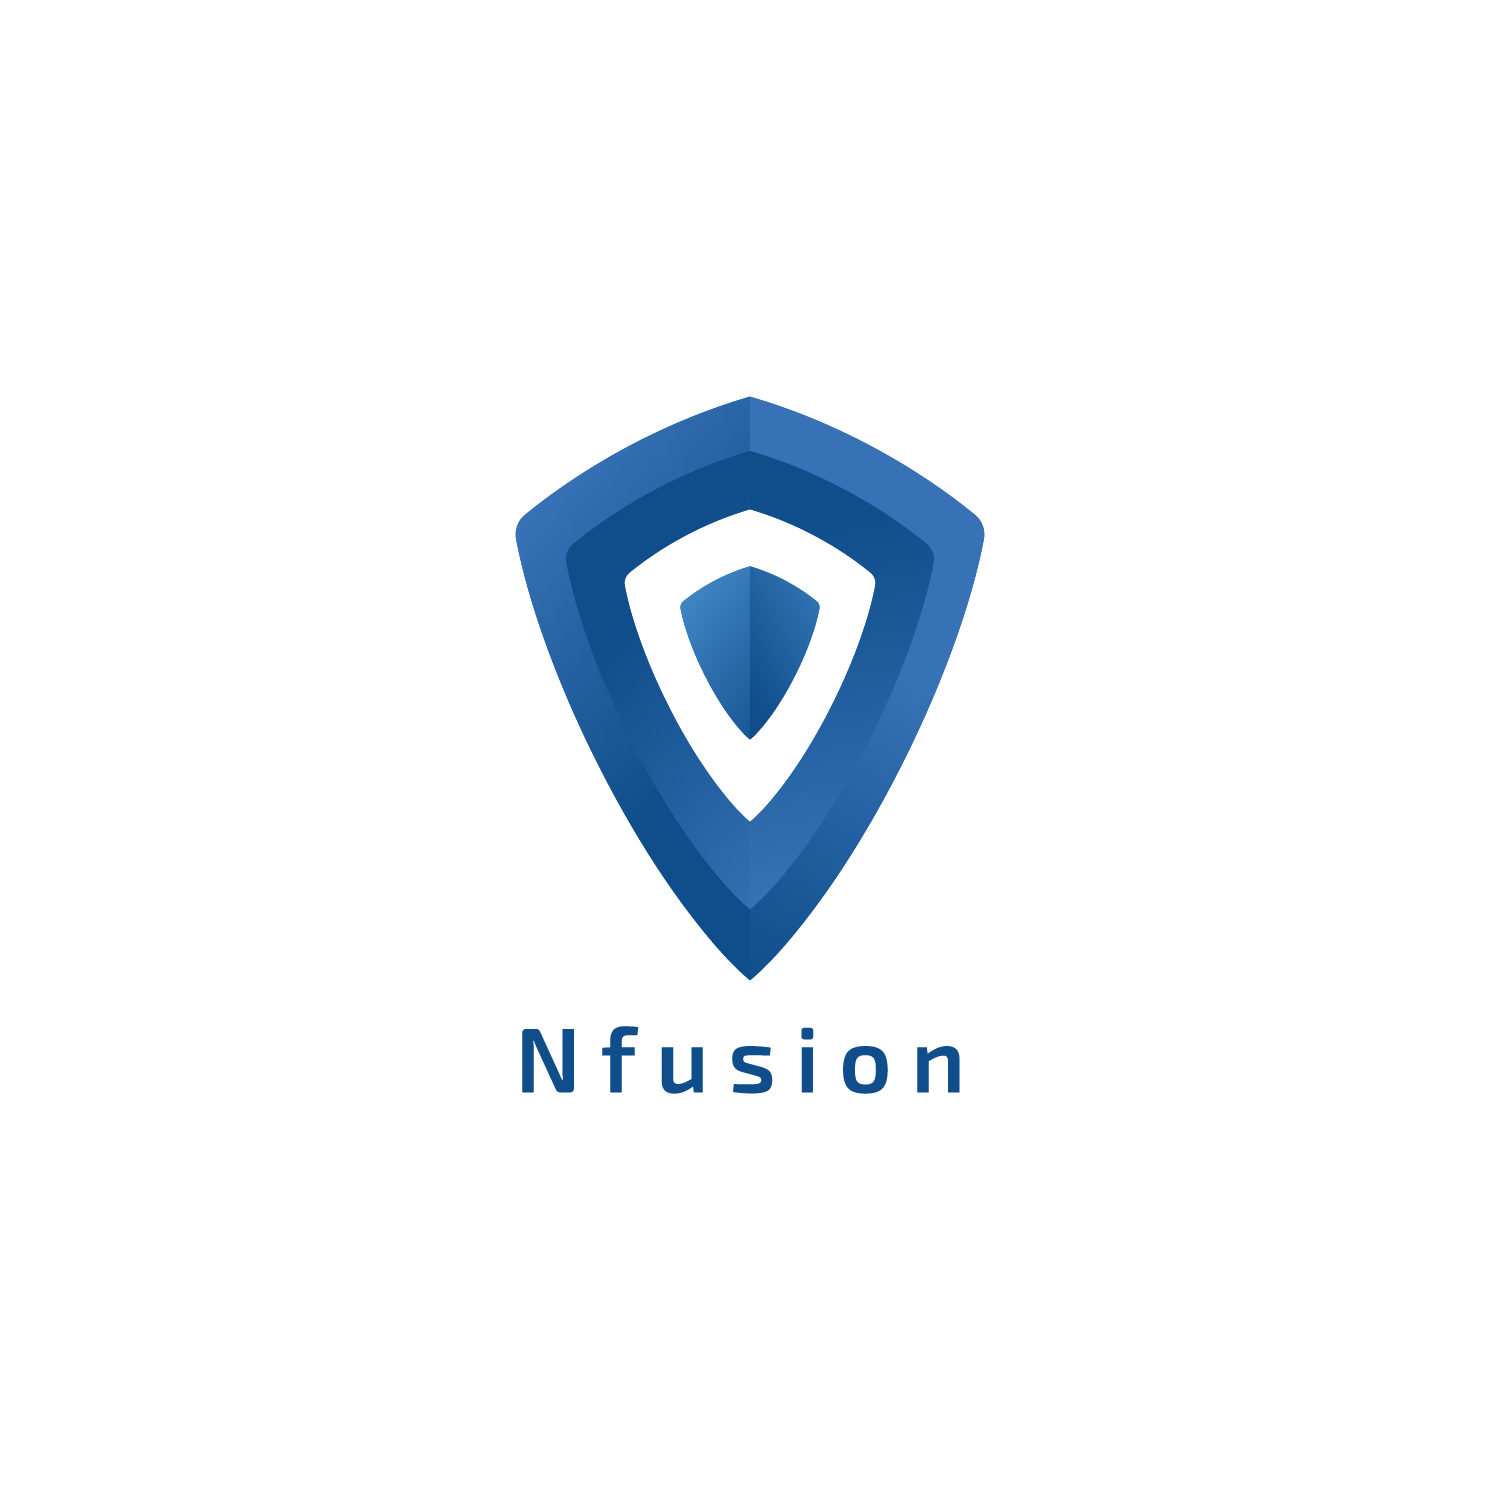 NTP_NFUSION_LOGOTYPE